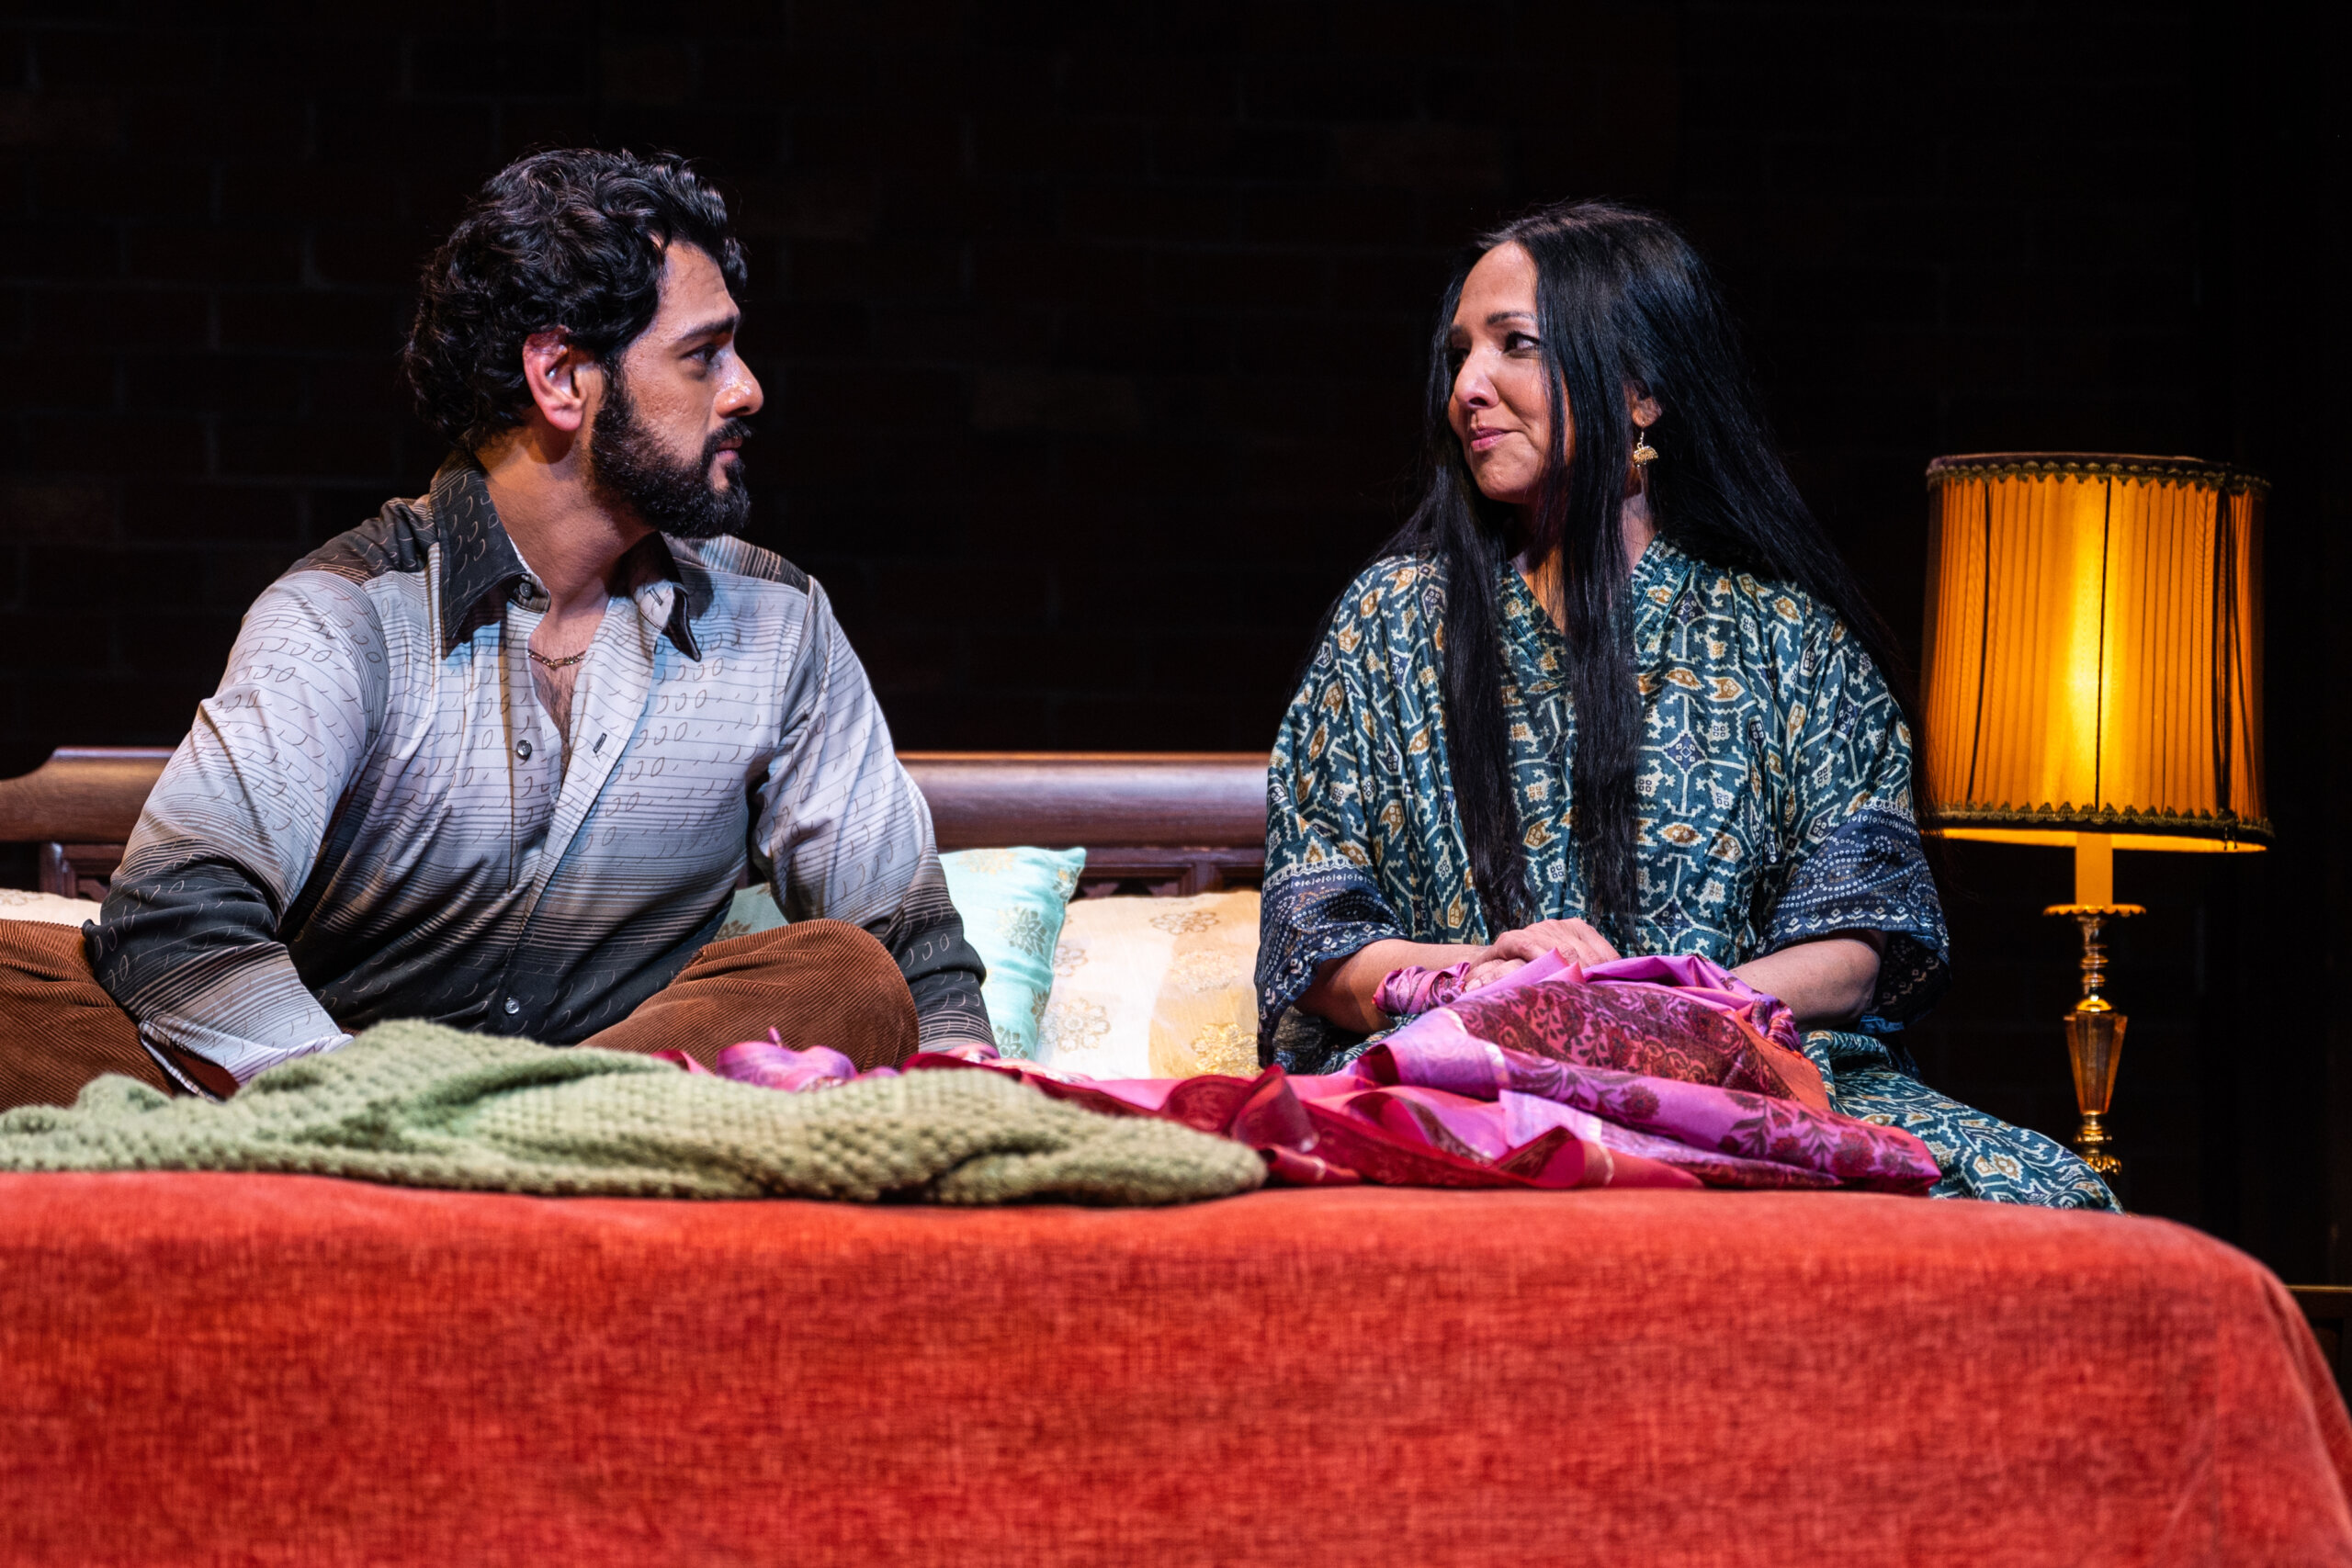 Pamela Mala Sinha's Latest Play "New" Breathes Fresh Life Into Our Parents' Immigrant Story